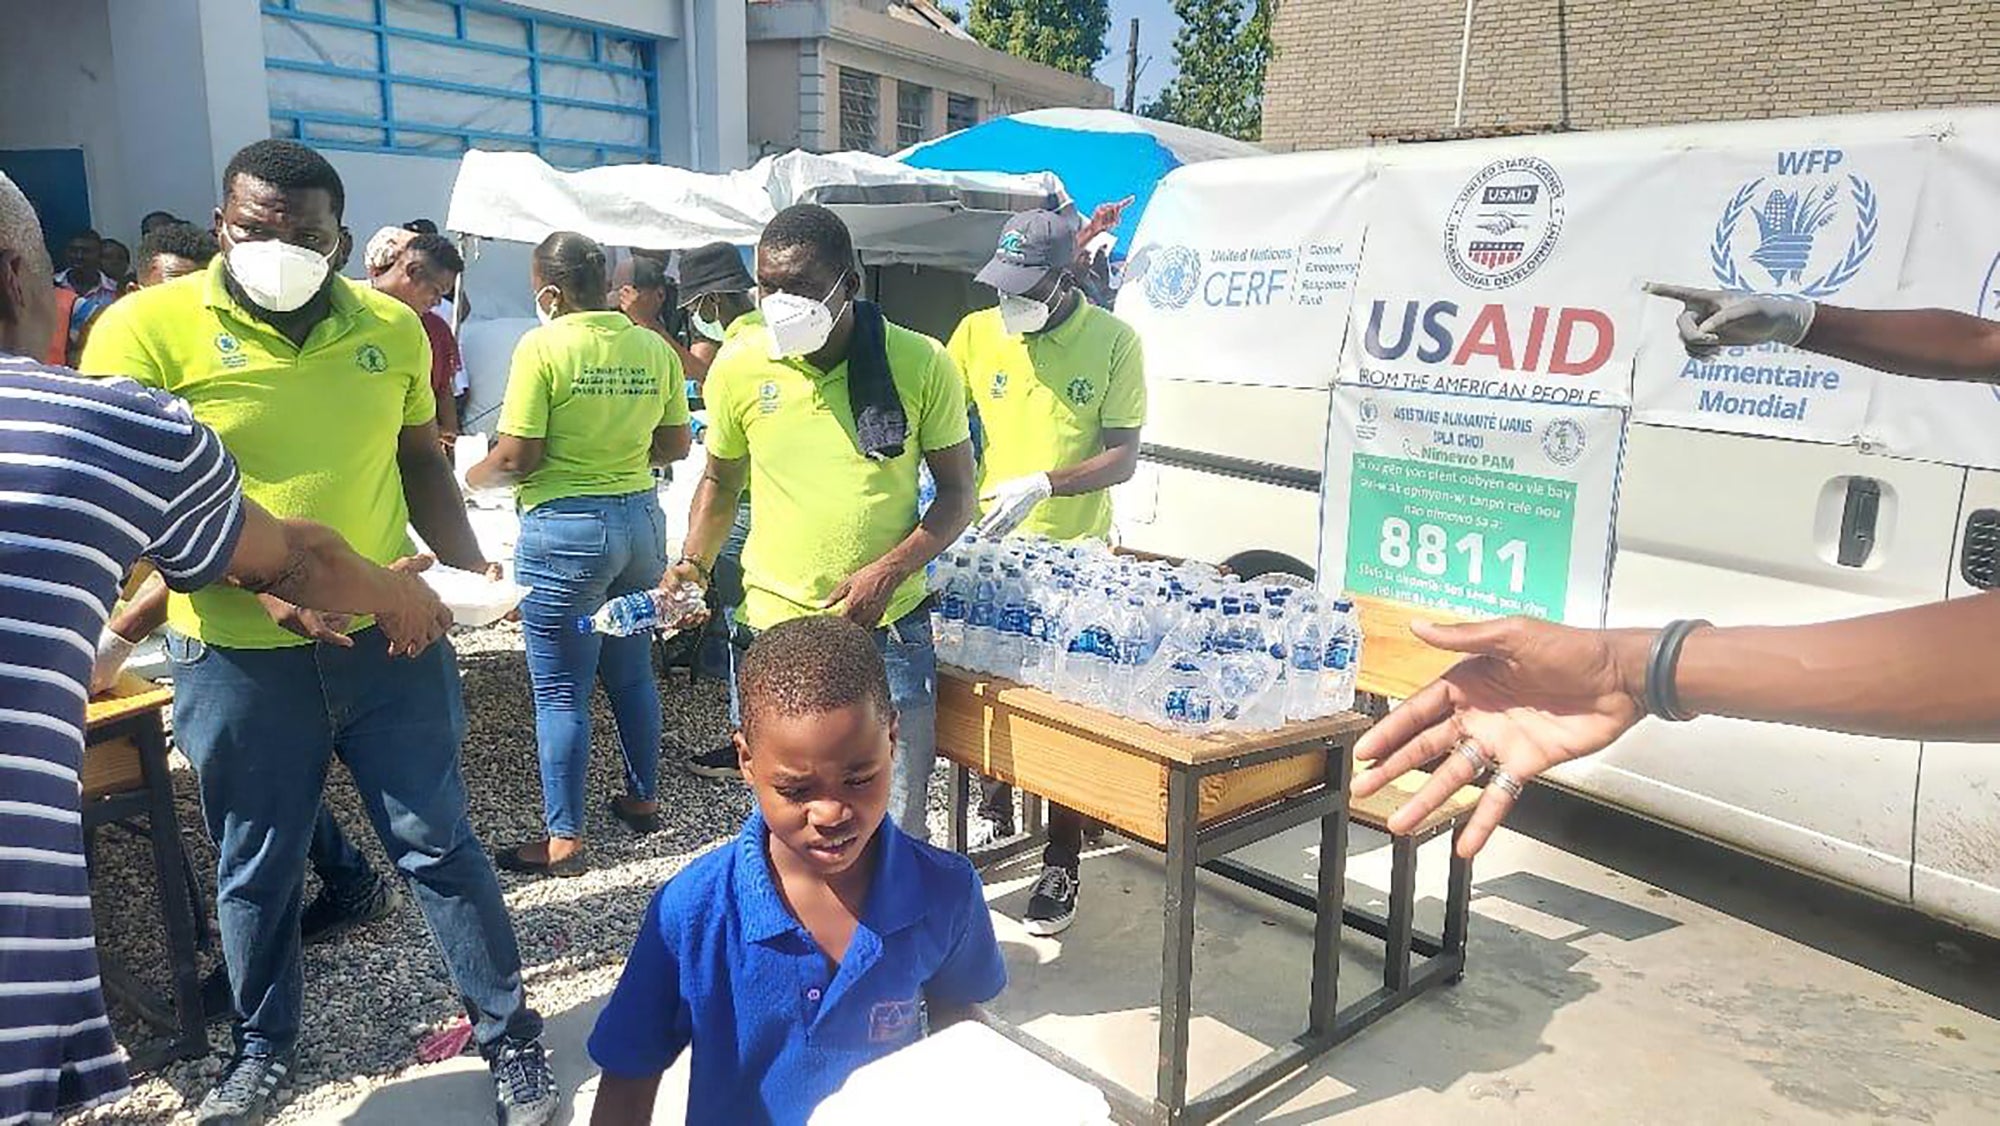 Ignace, aged six, receives hot meals and water provided by the WFP and a local partner at a site in Port-au-Prince